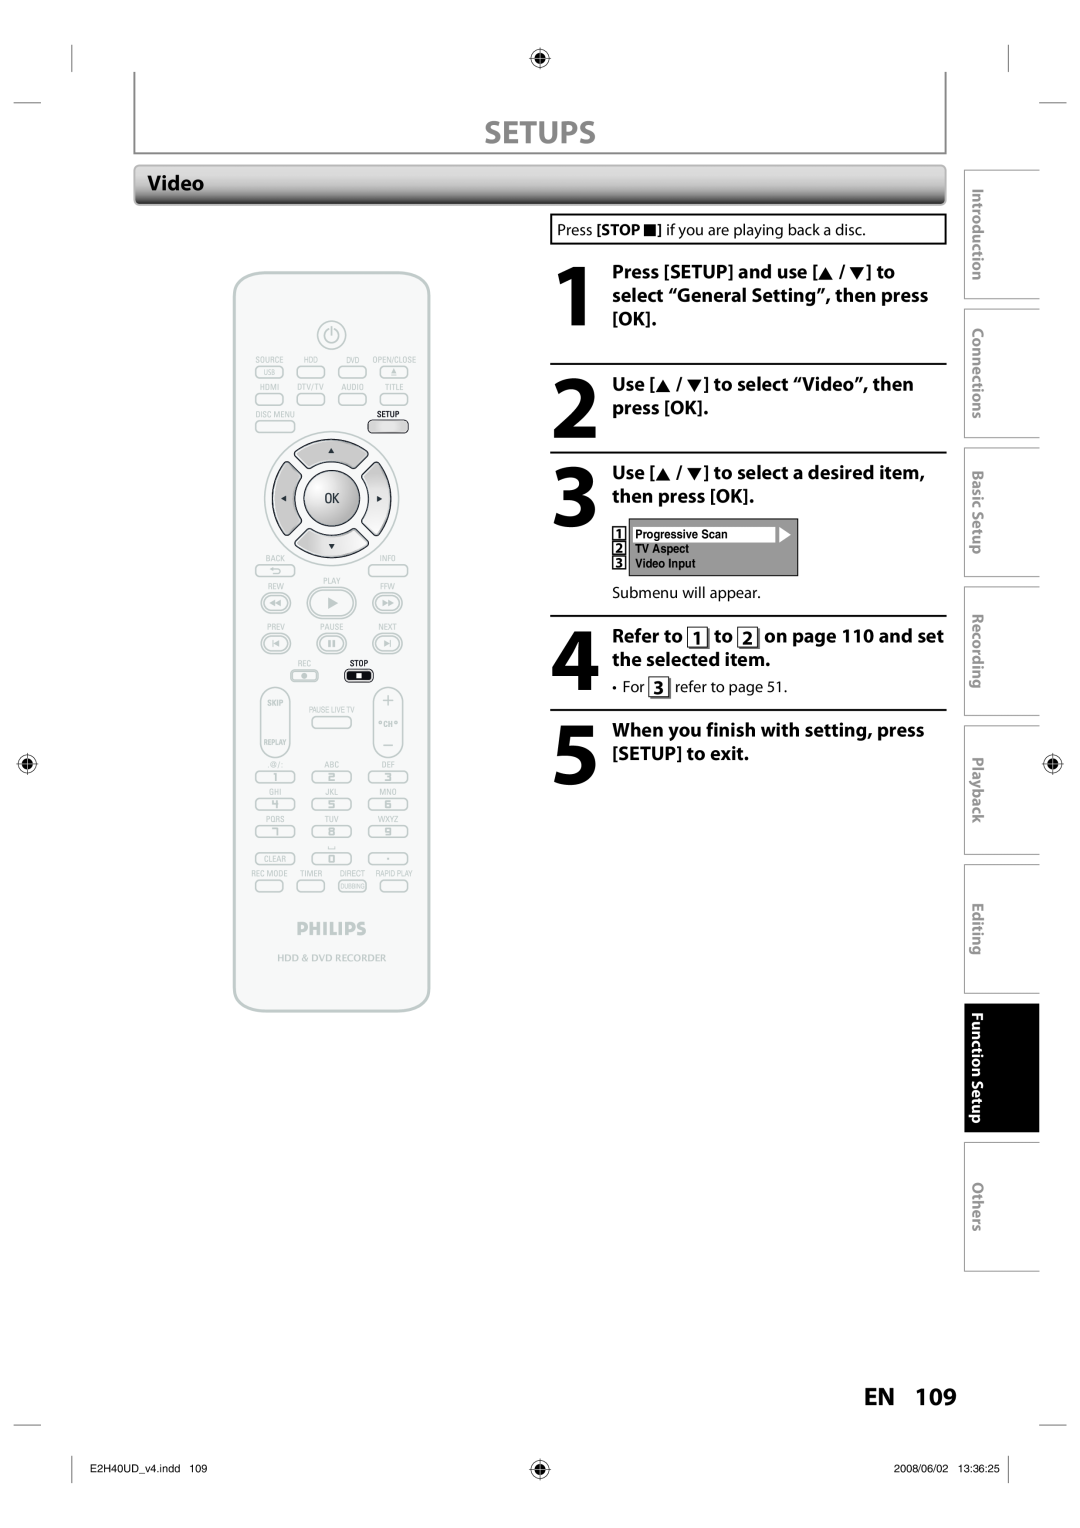 Philips DVDR3575H/37 Use K / L to select “Video”, then press OK, Use K / L to select a desired item, then press OK 